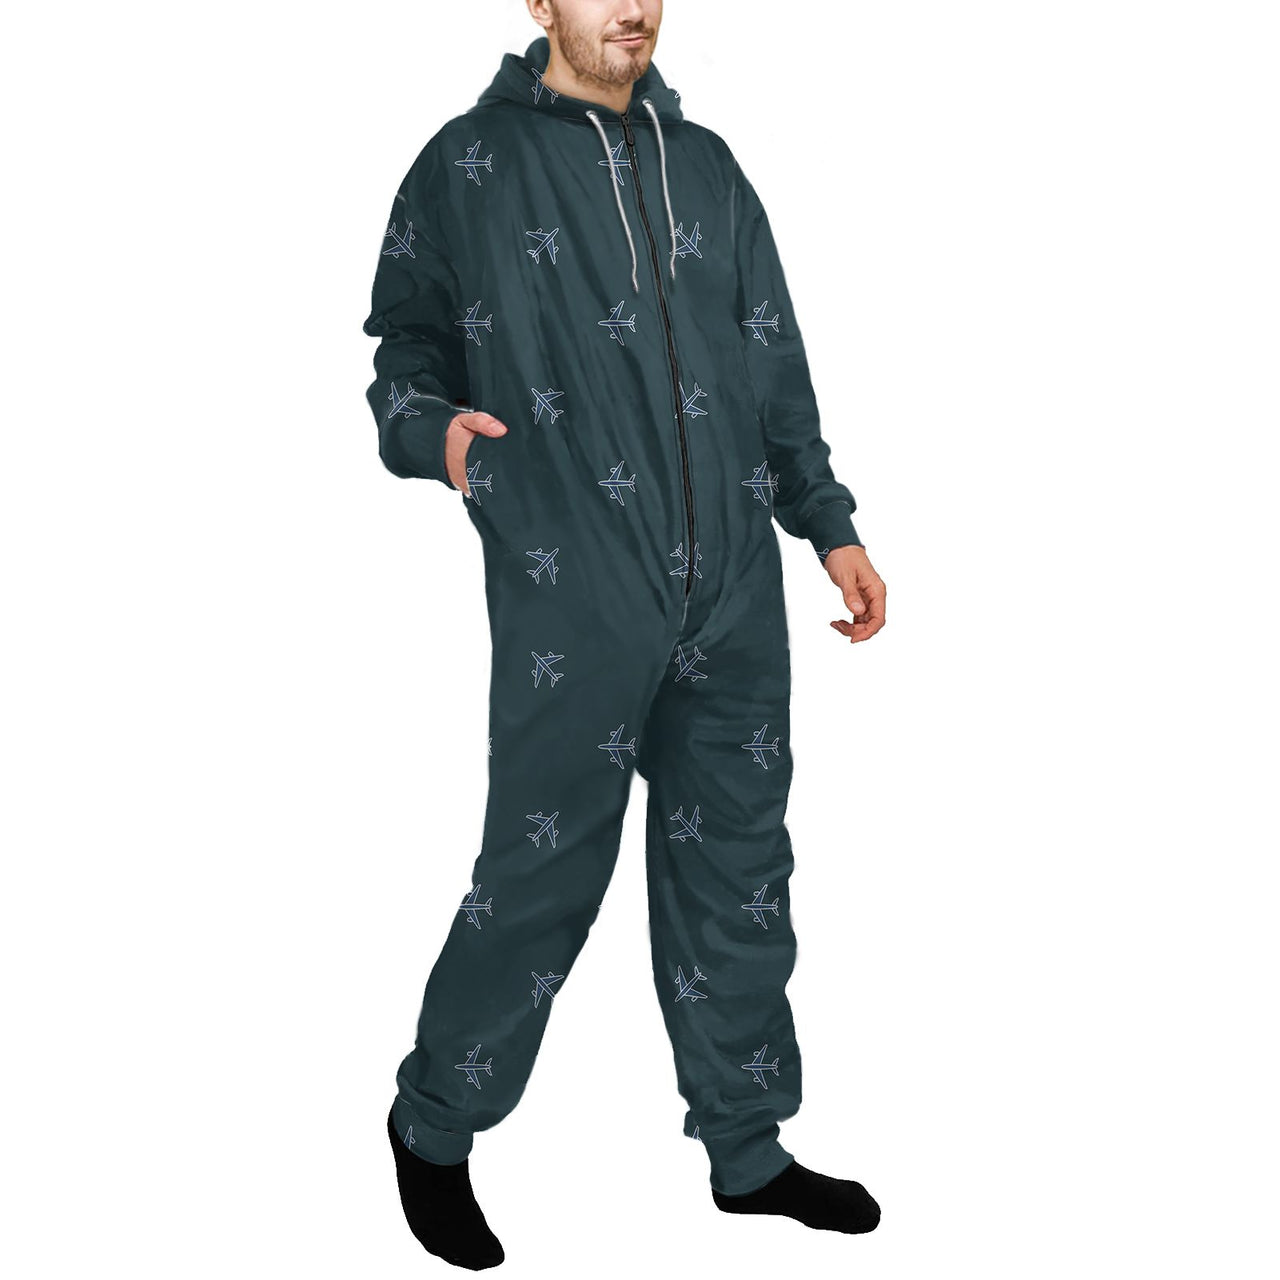 Nice Airplanes (Green) Designed Jumpsuit for Men & Women